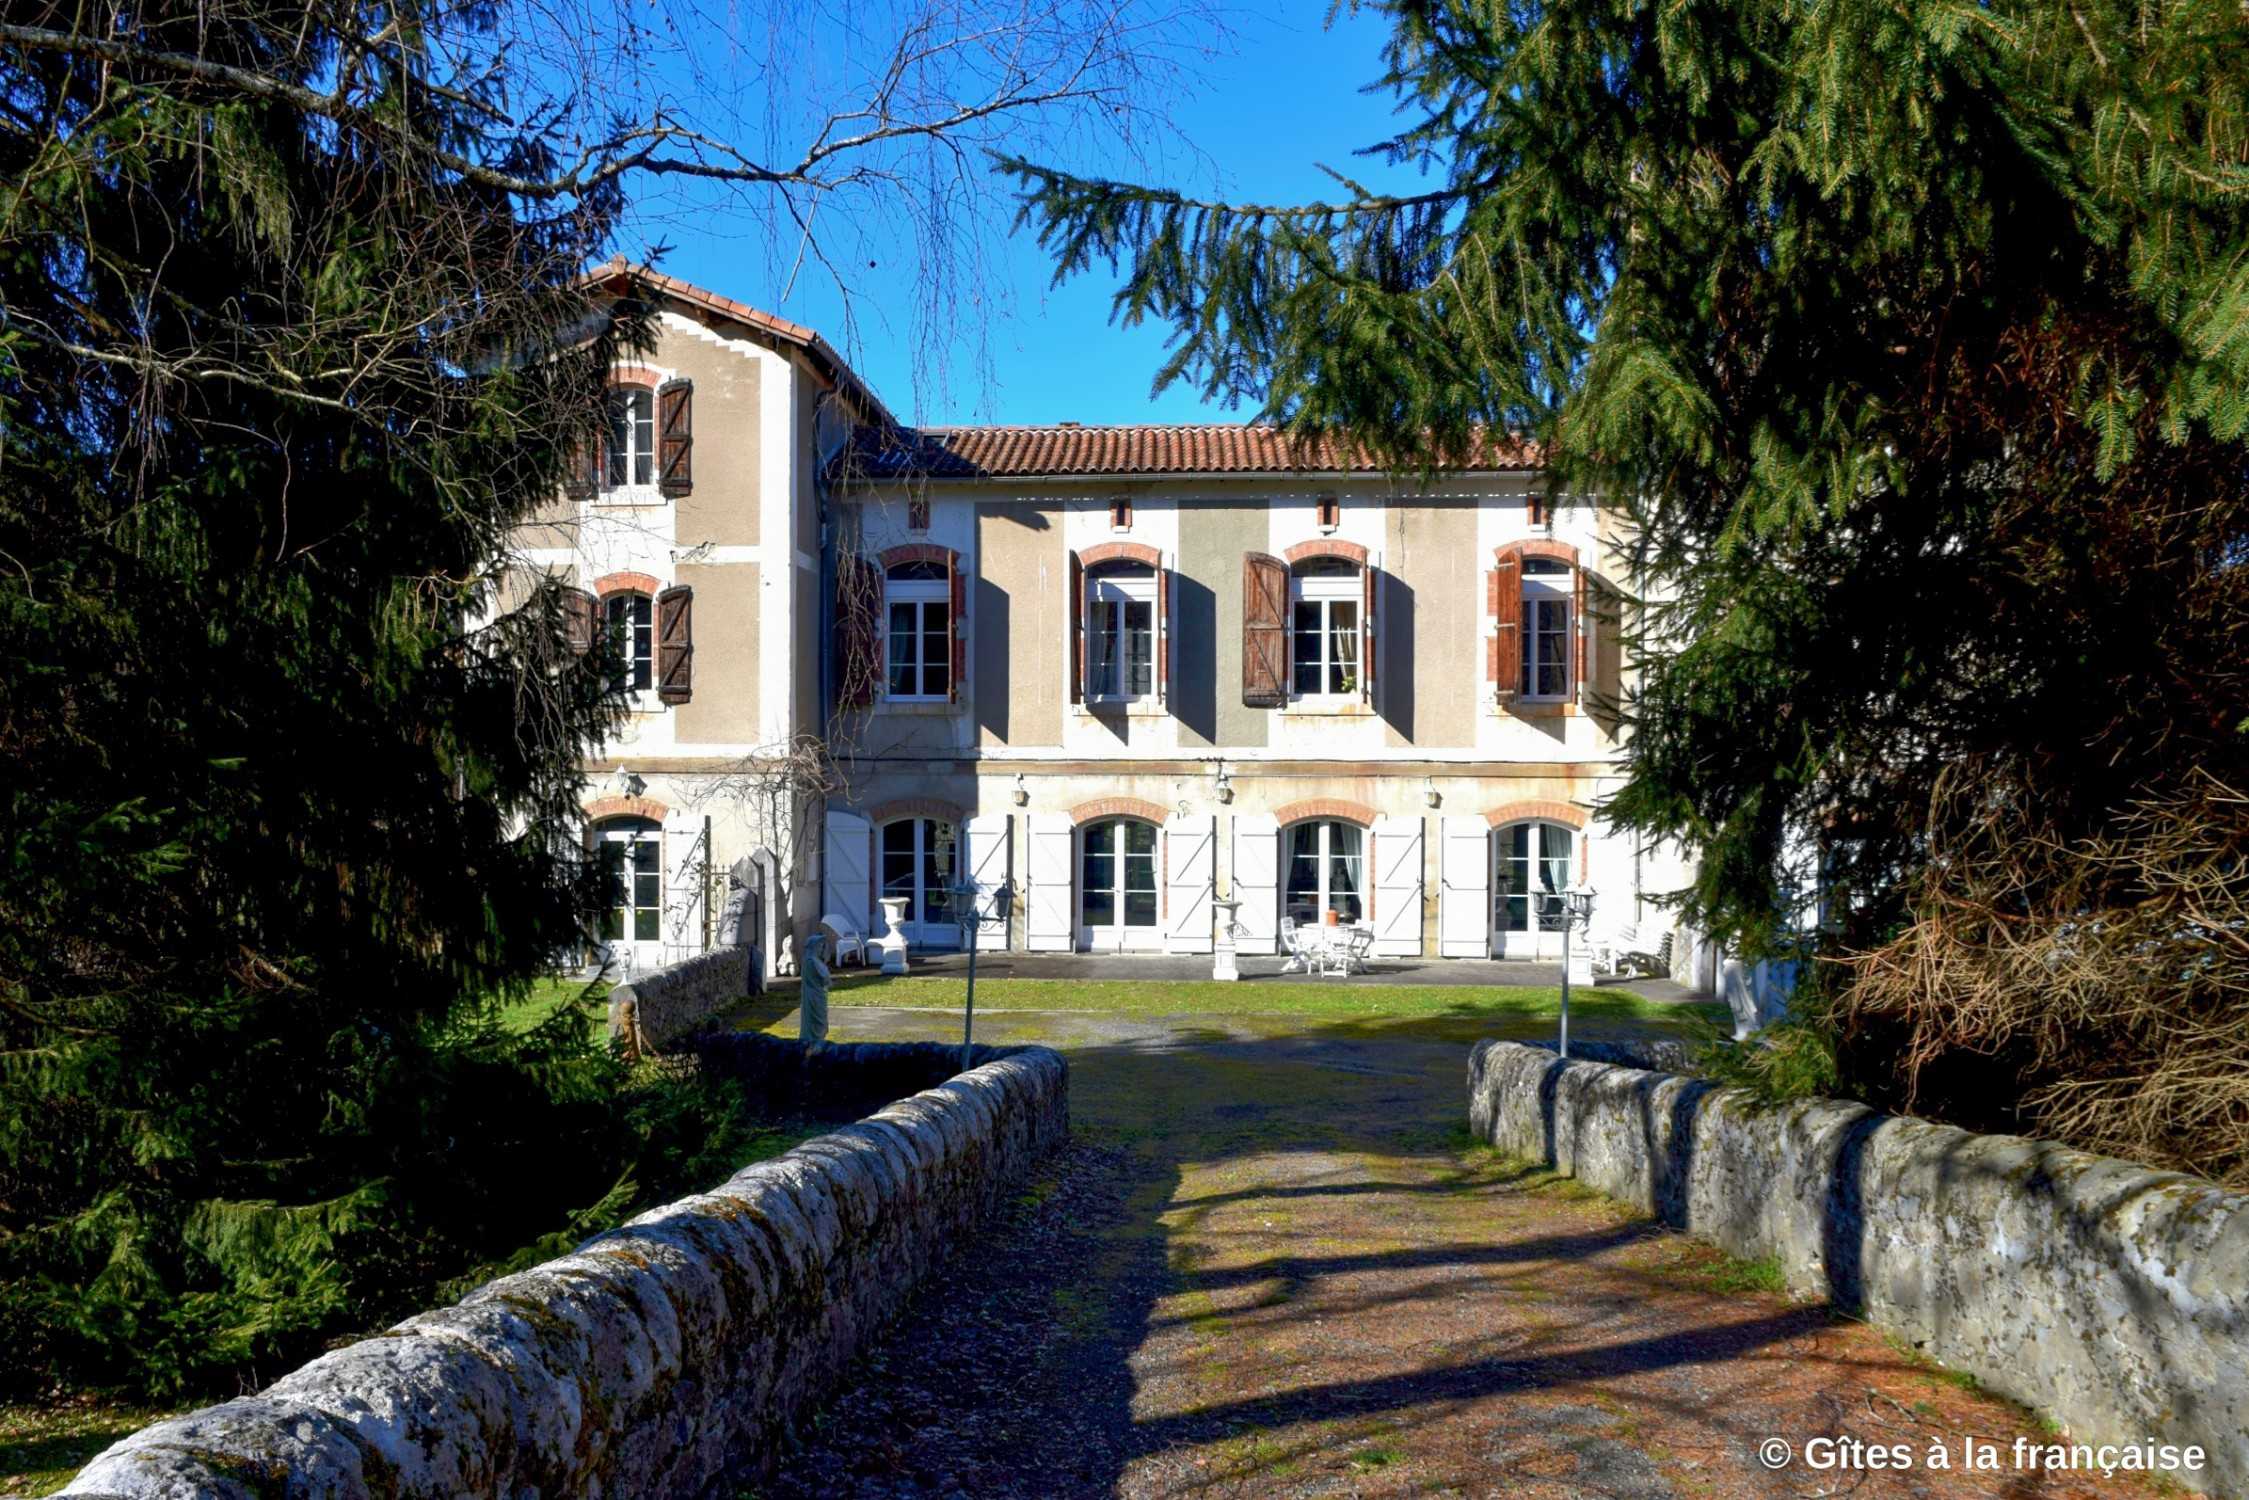 Photos Historic school building in the Pyrenees - Vacation home / B&B